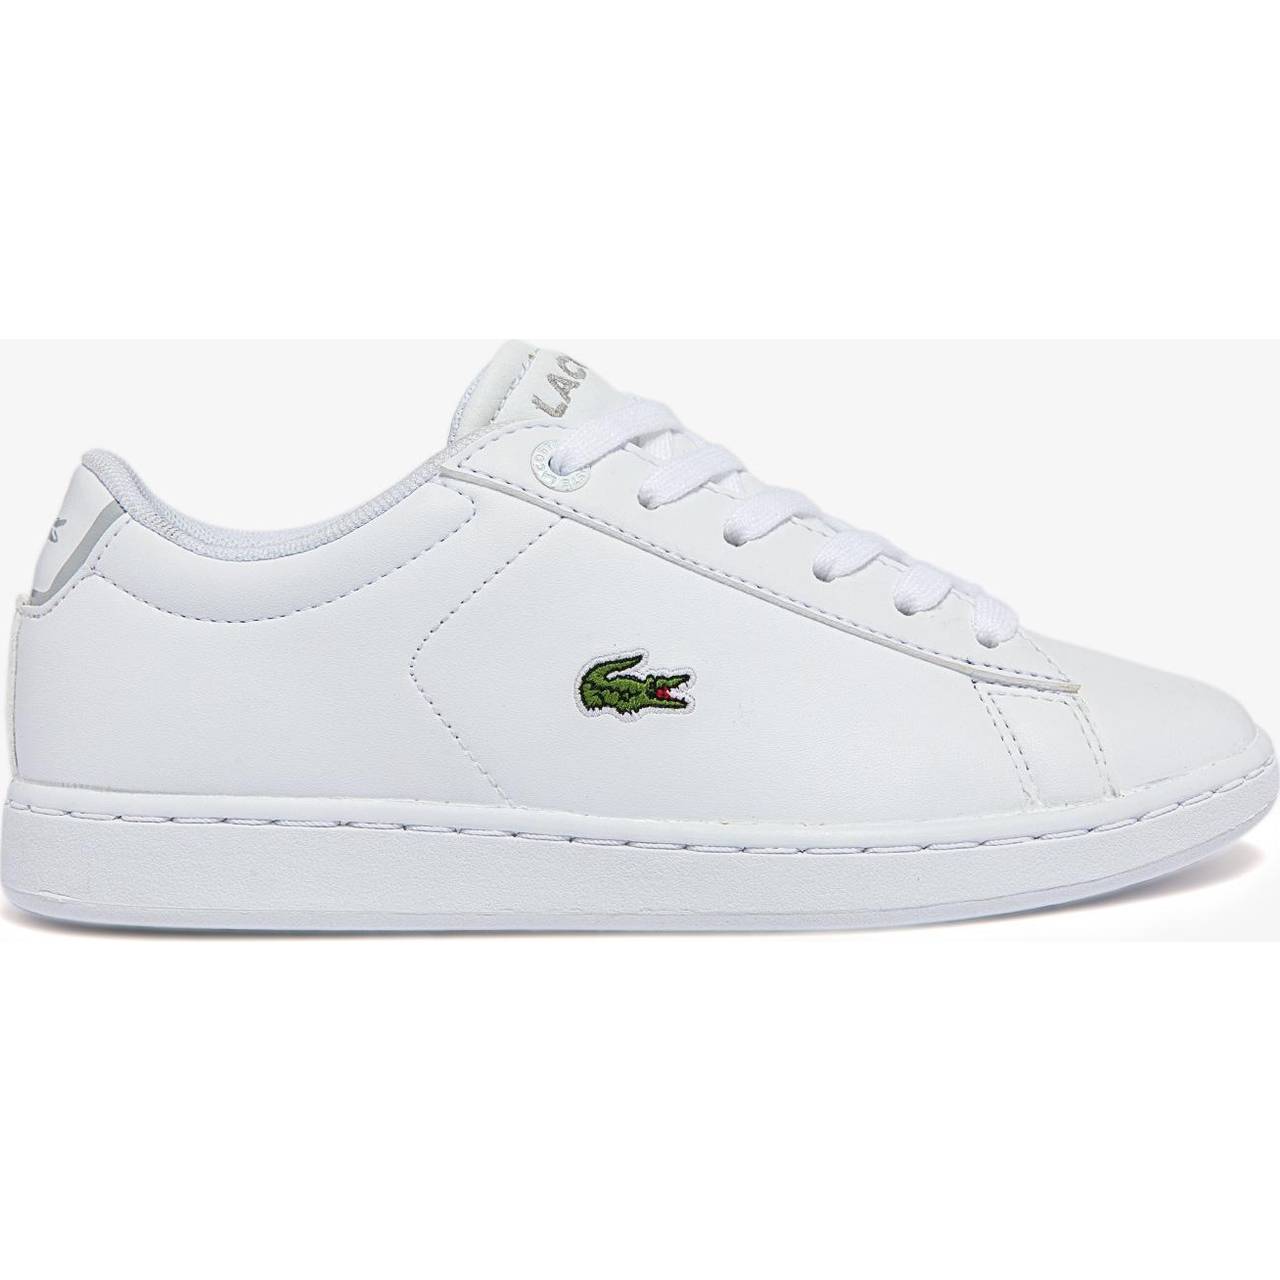 Lacoste Infants' Carnaby Evo BL Synthetic Trainers Kids White • Price